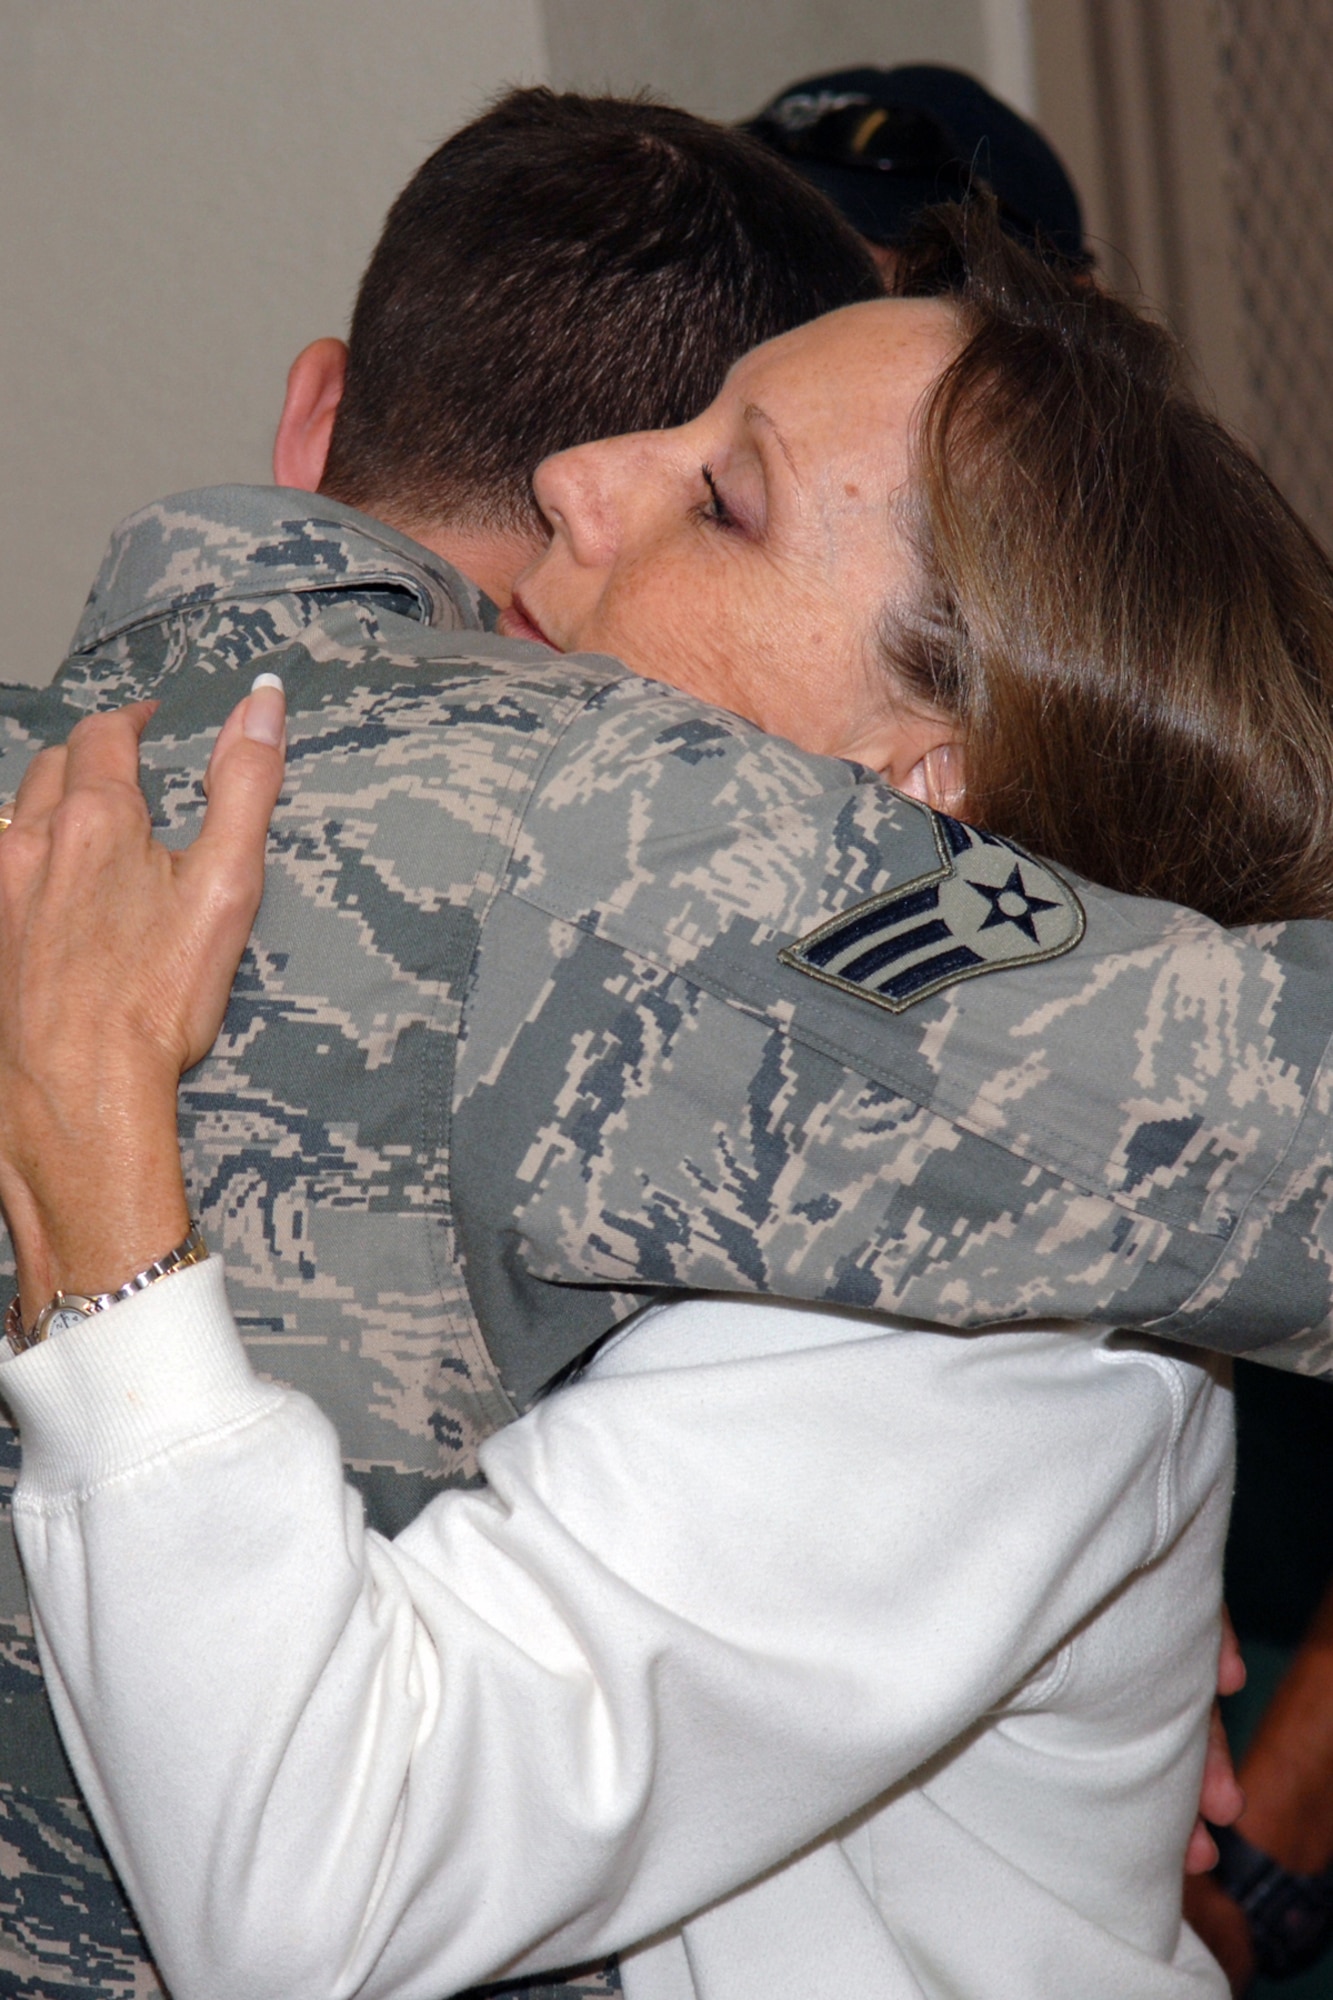 DYESS AIR FORCE BASE, Tx.-- U.S. Air Force Senior Airman Wade Isham hugs his mother at the 7th Securtiy Forces Armory before his deployment on Sept. 14, 2007. (U.S. Air Force Photo by Airman First Class Micheal S. Breaux)